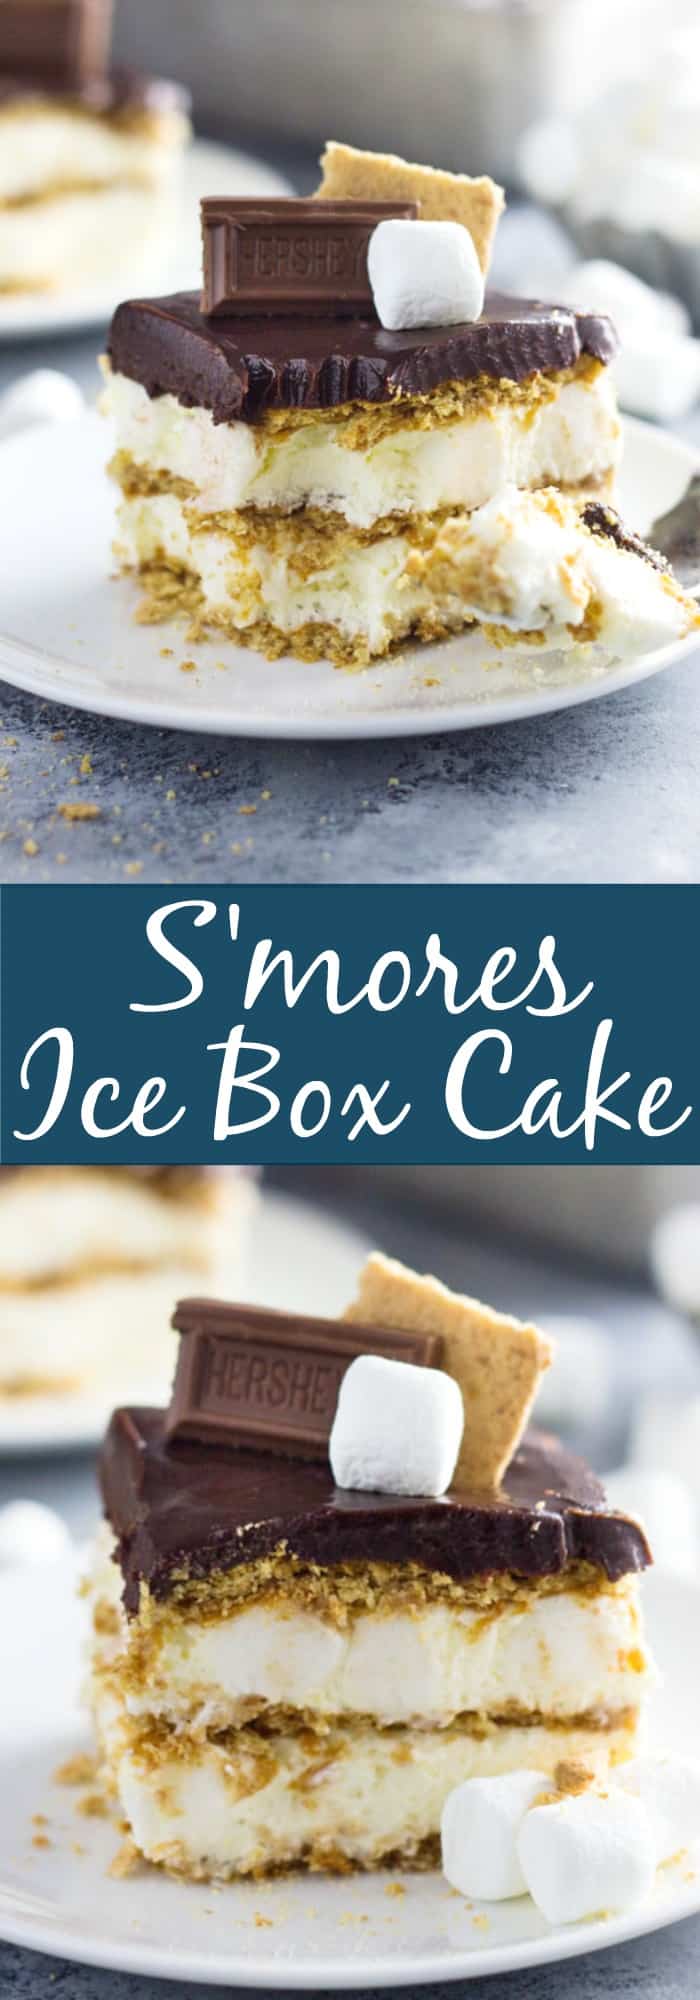 An easy S'mores Ice Box Cake recipe made with graham crackers, marshmallow filling and topped with chocolate ganache! | www.countrysidecravings.com